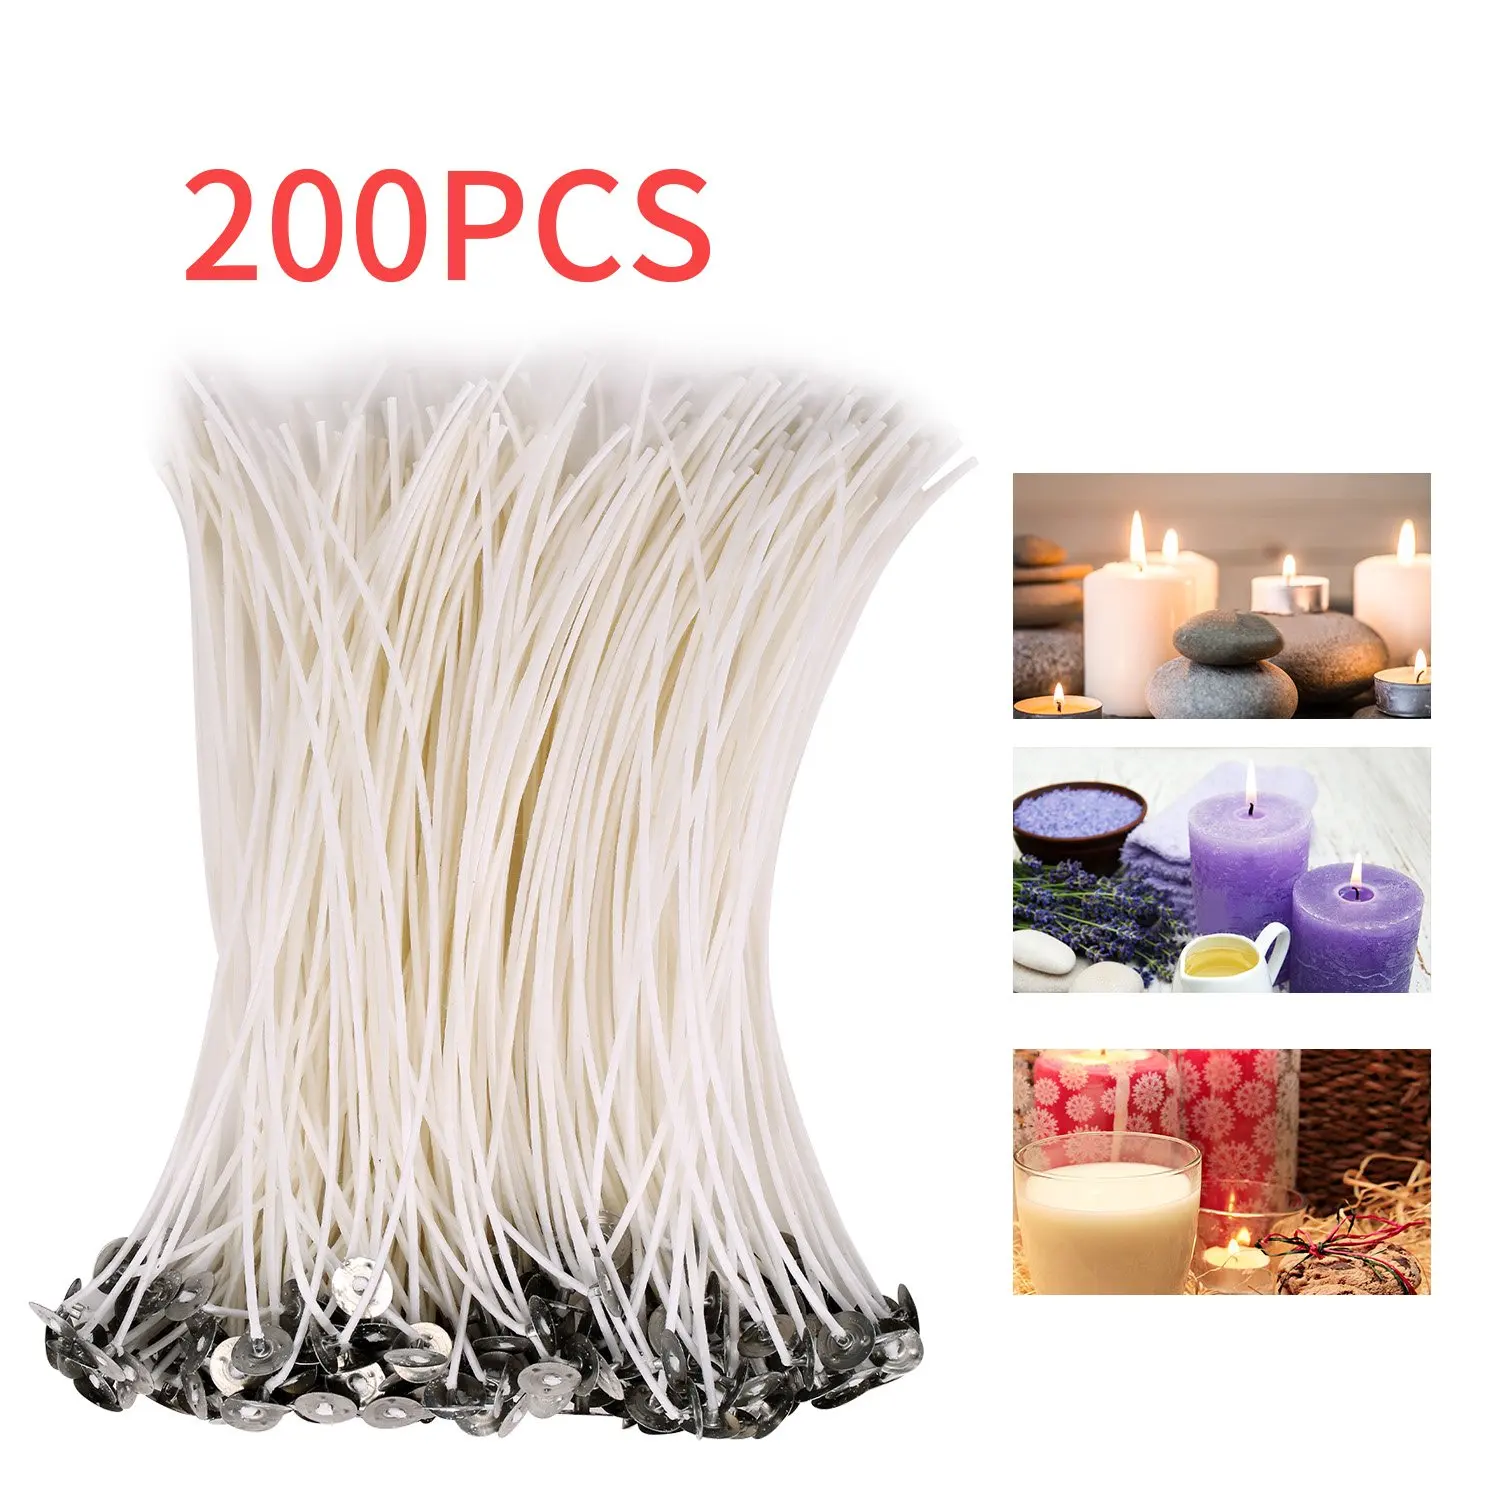 12cm 100PCS Candle Wicks Cotton Core Candle Making Accessory Candle Wick Centering Device Natural Candle Wicks with Tabs 100/% Natural Low Smoke Pre-Waxed for Candle Making